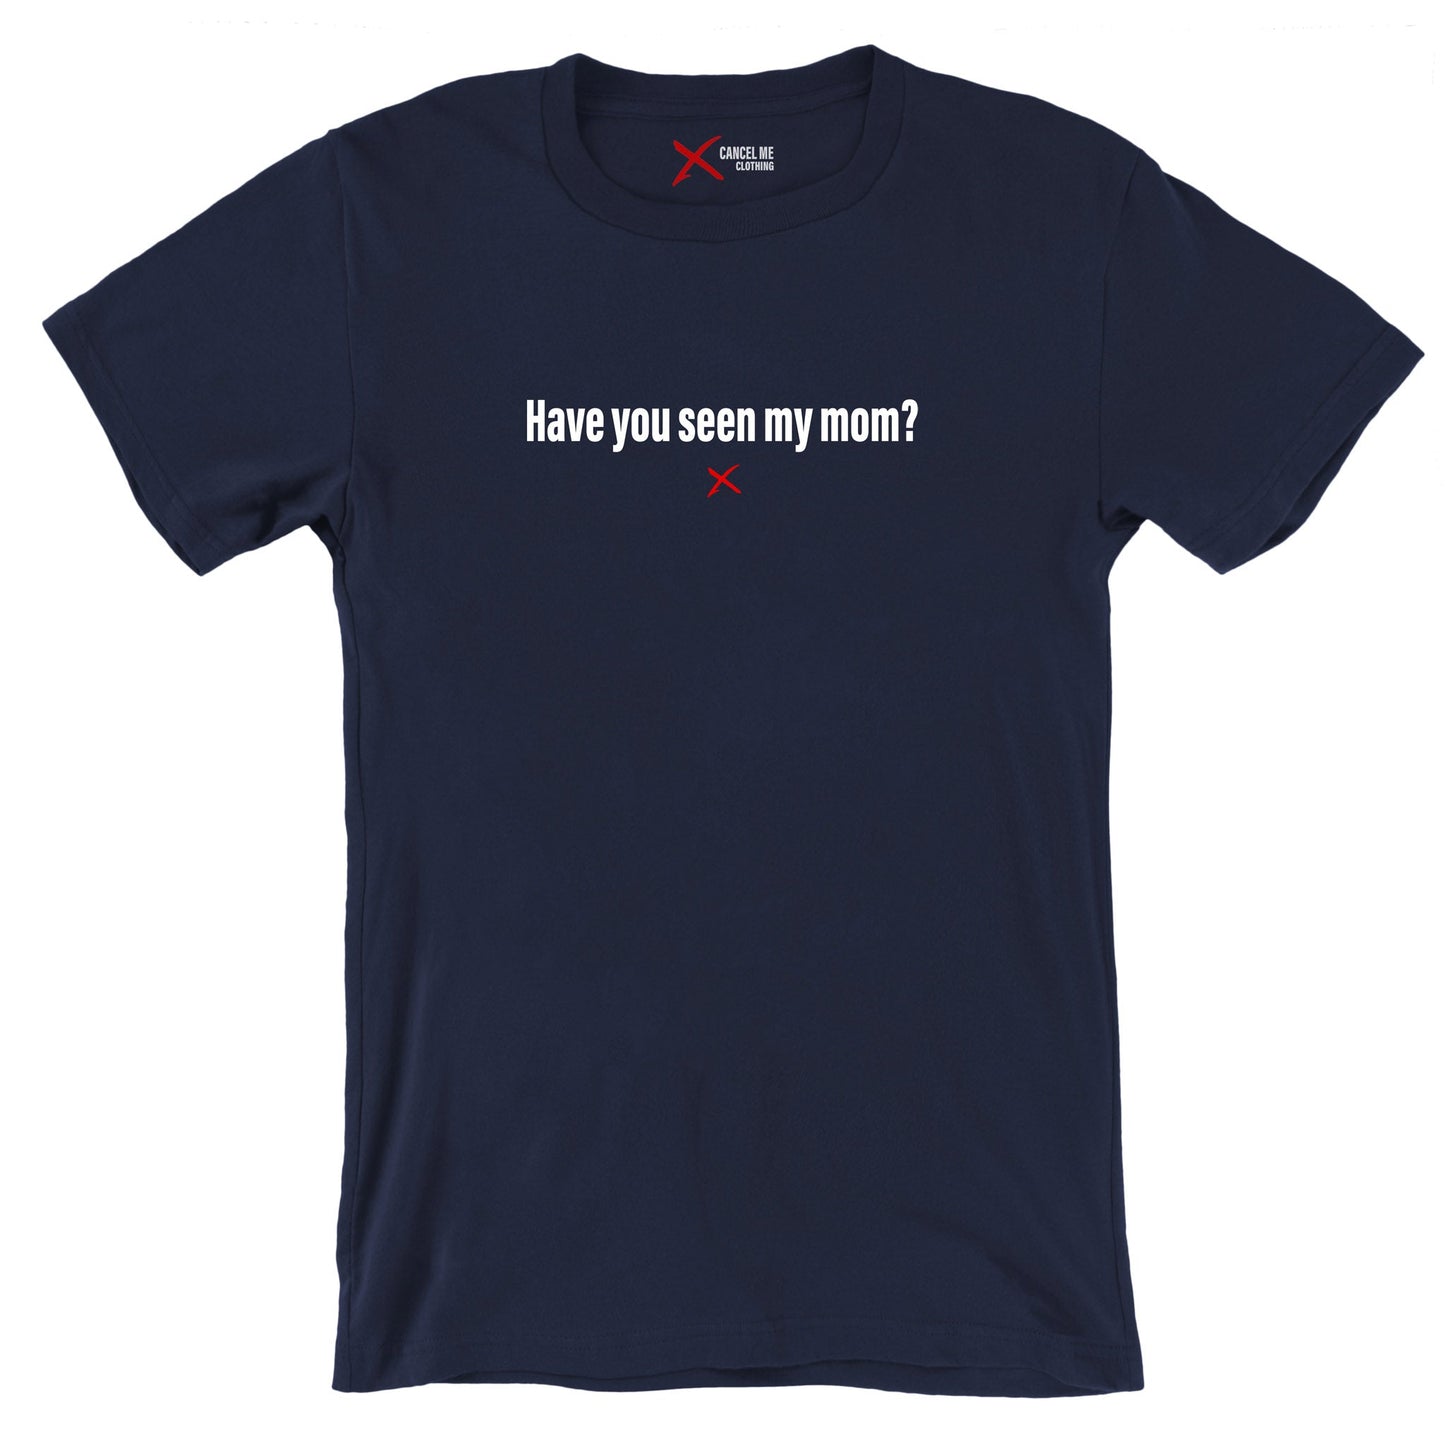 Have you seen my mom? - Shirt